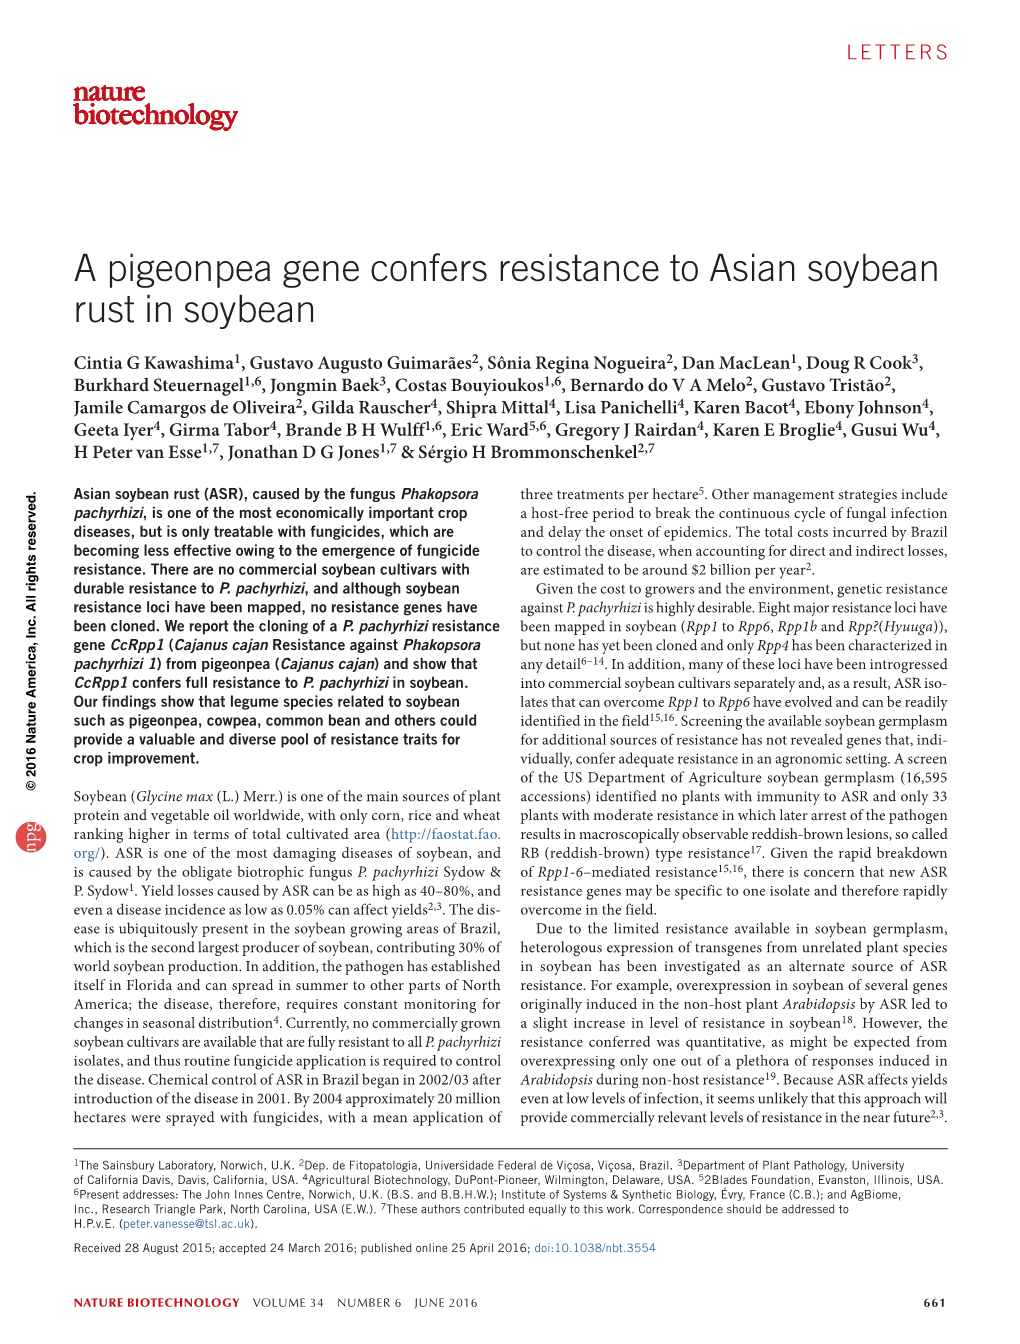 A Pigeonpea Gene Confers Resistance to Asian Soybean Rust in Soybean